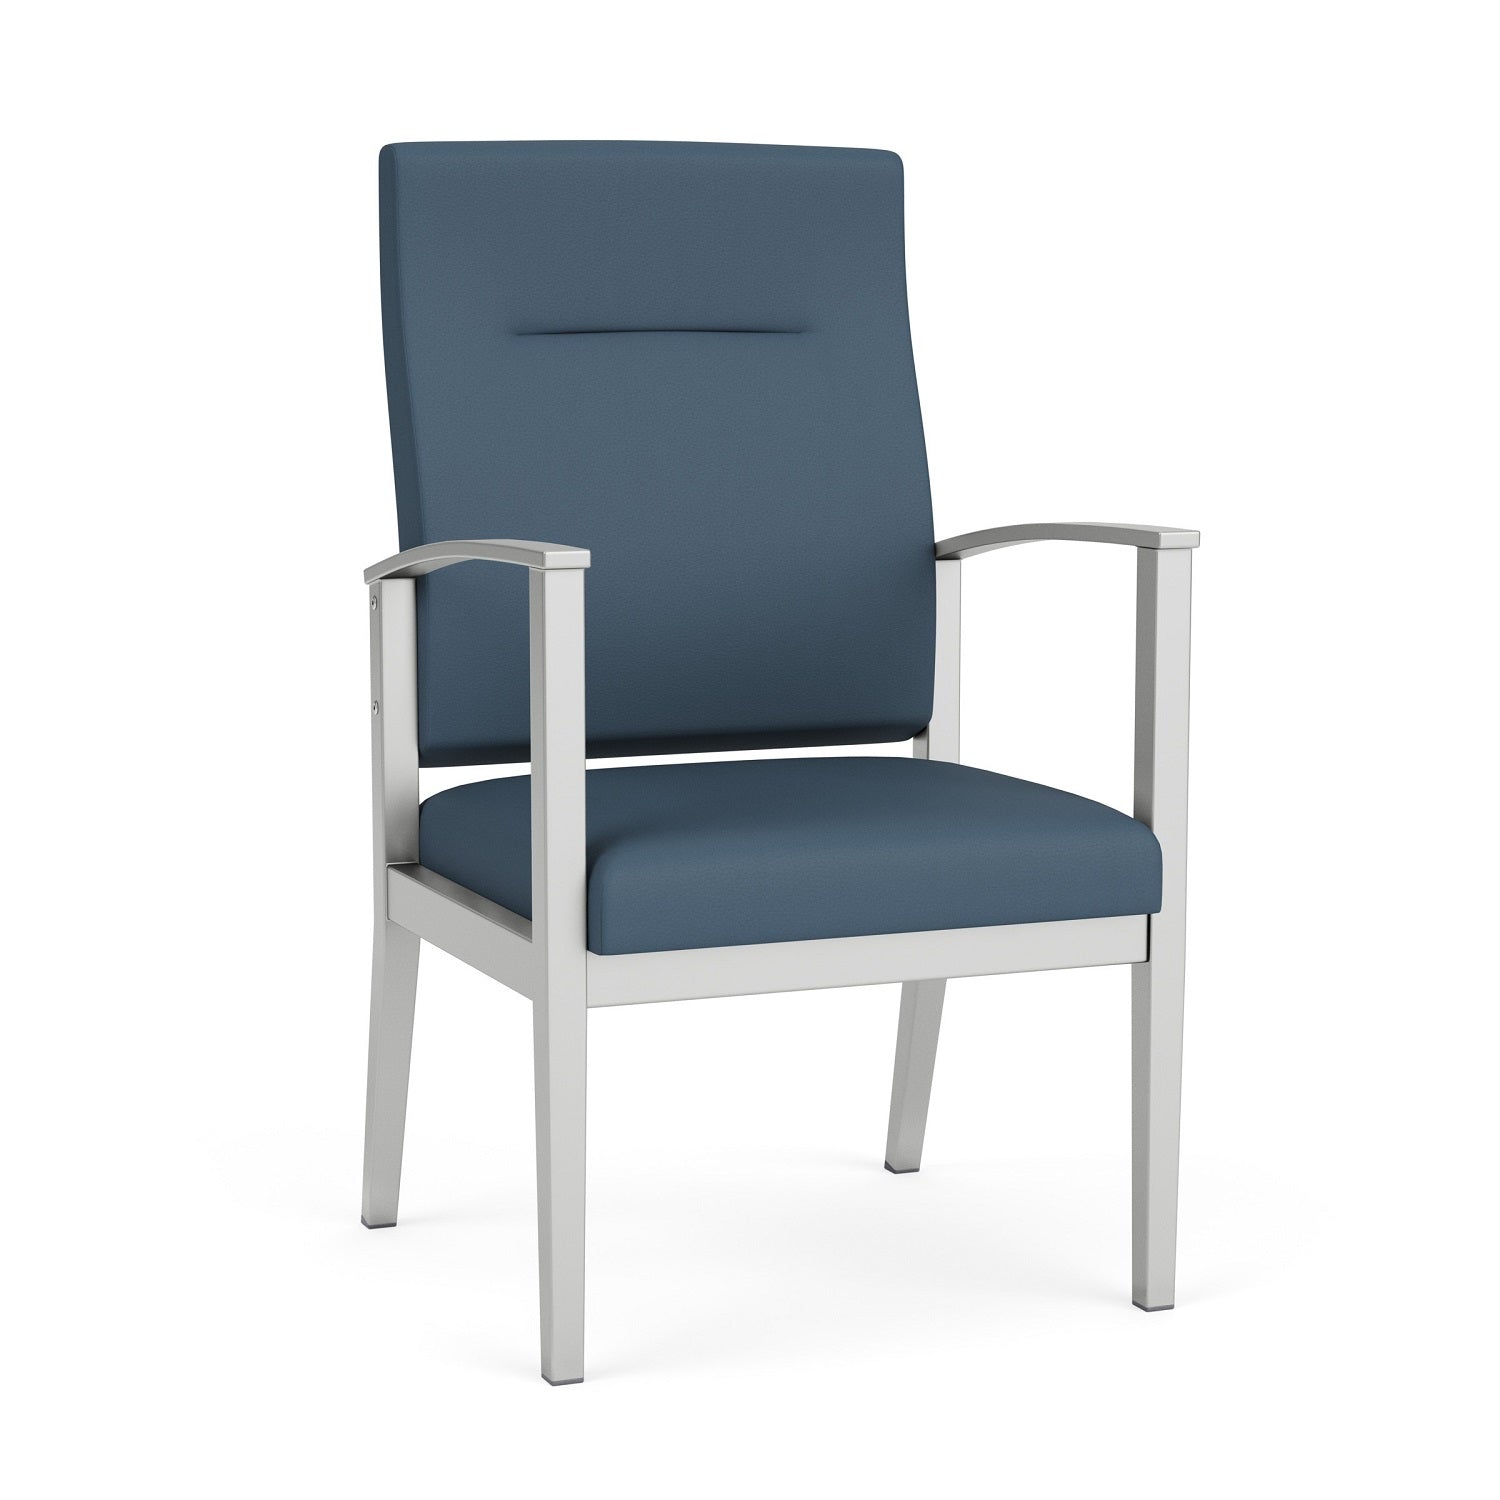 Amherst Steel Collection Reception Seating, Patient Chair, High Back, Standard Vinyl Upholstery, FREE SHIPPING